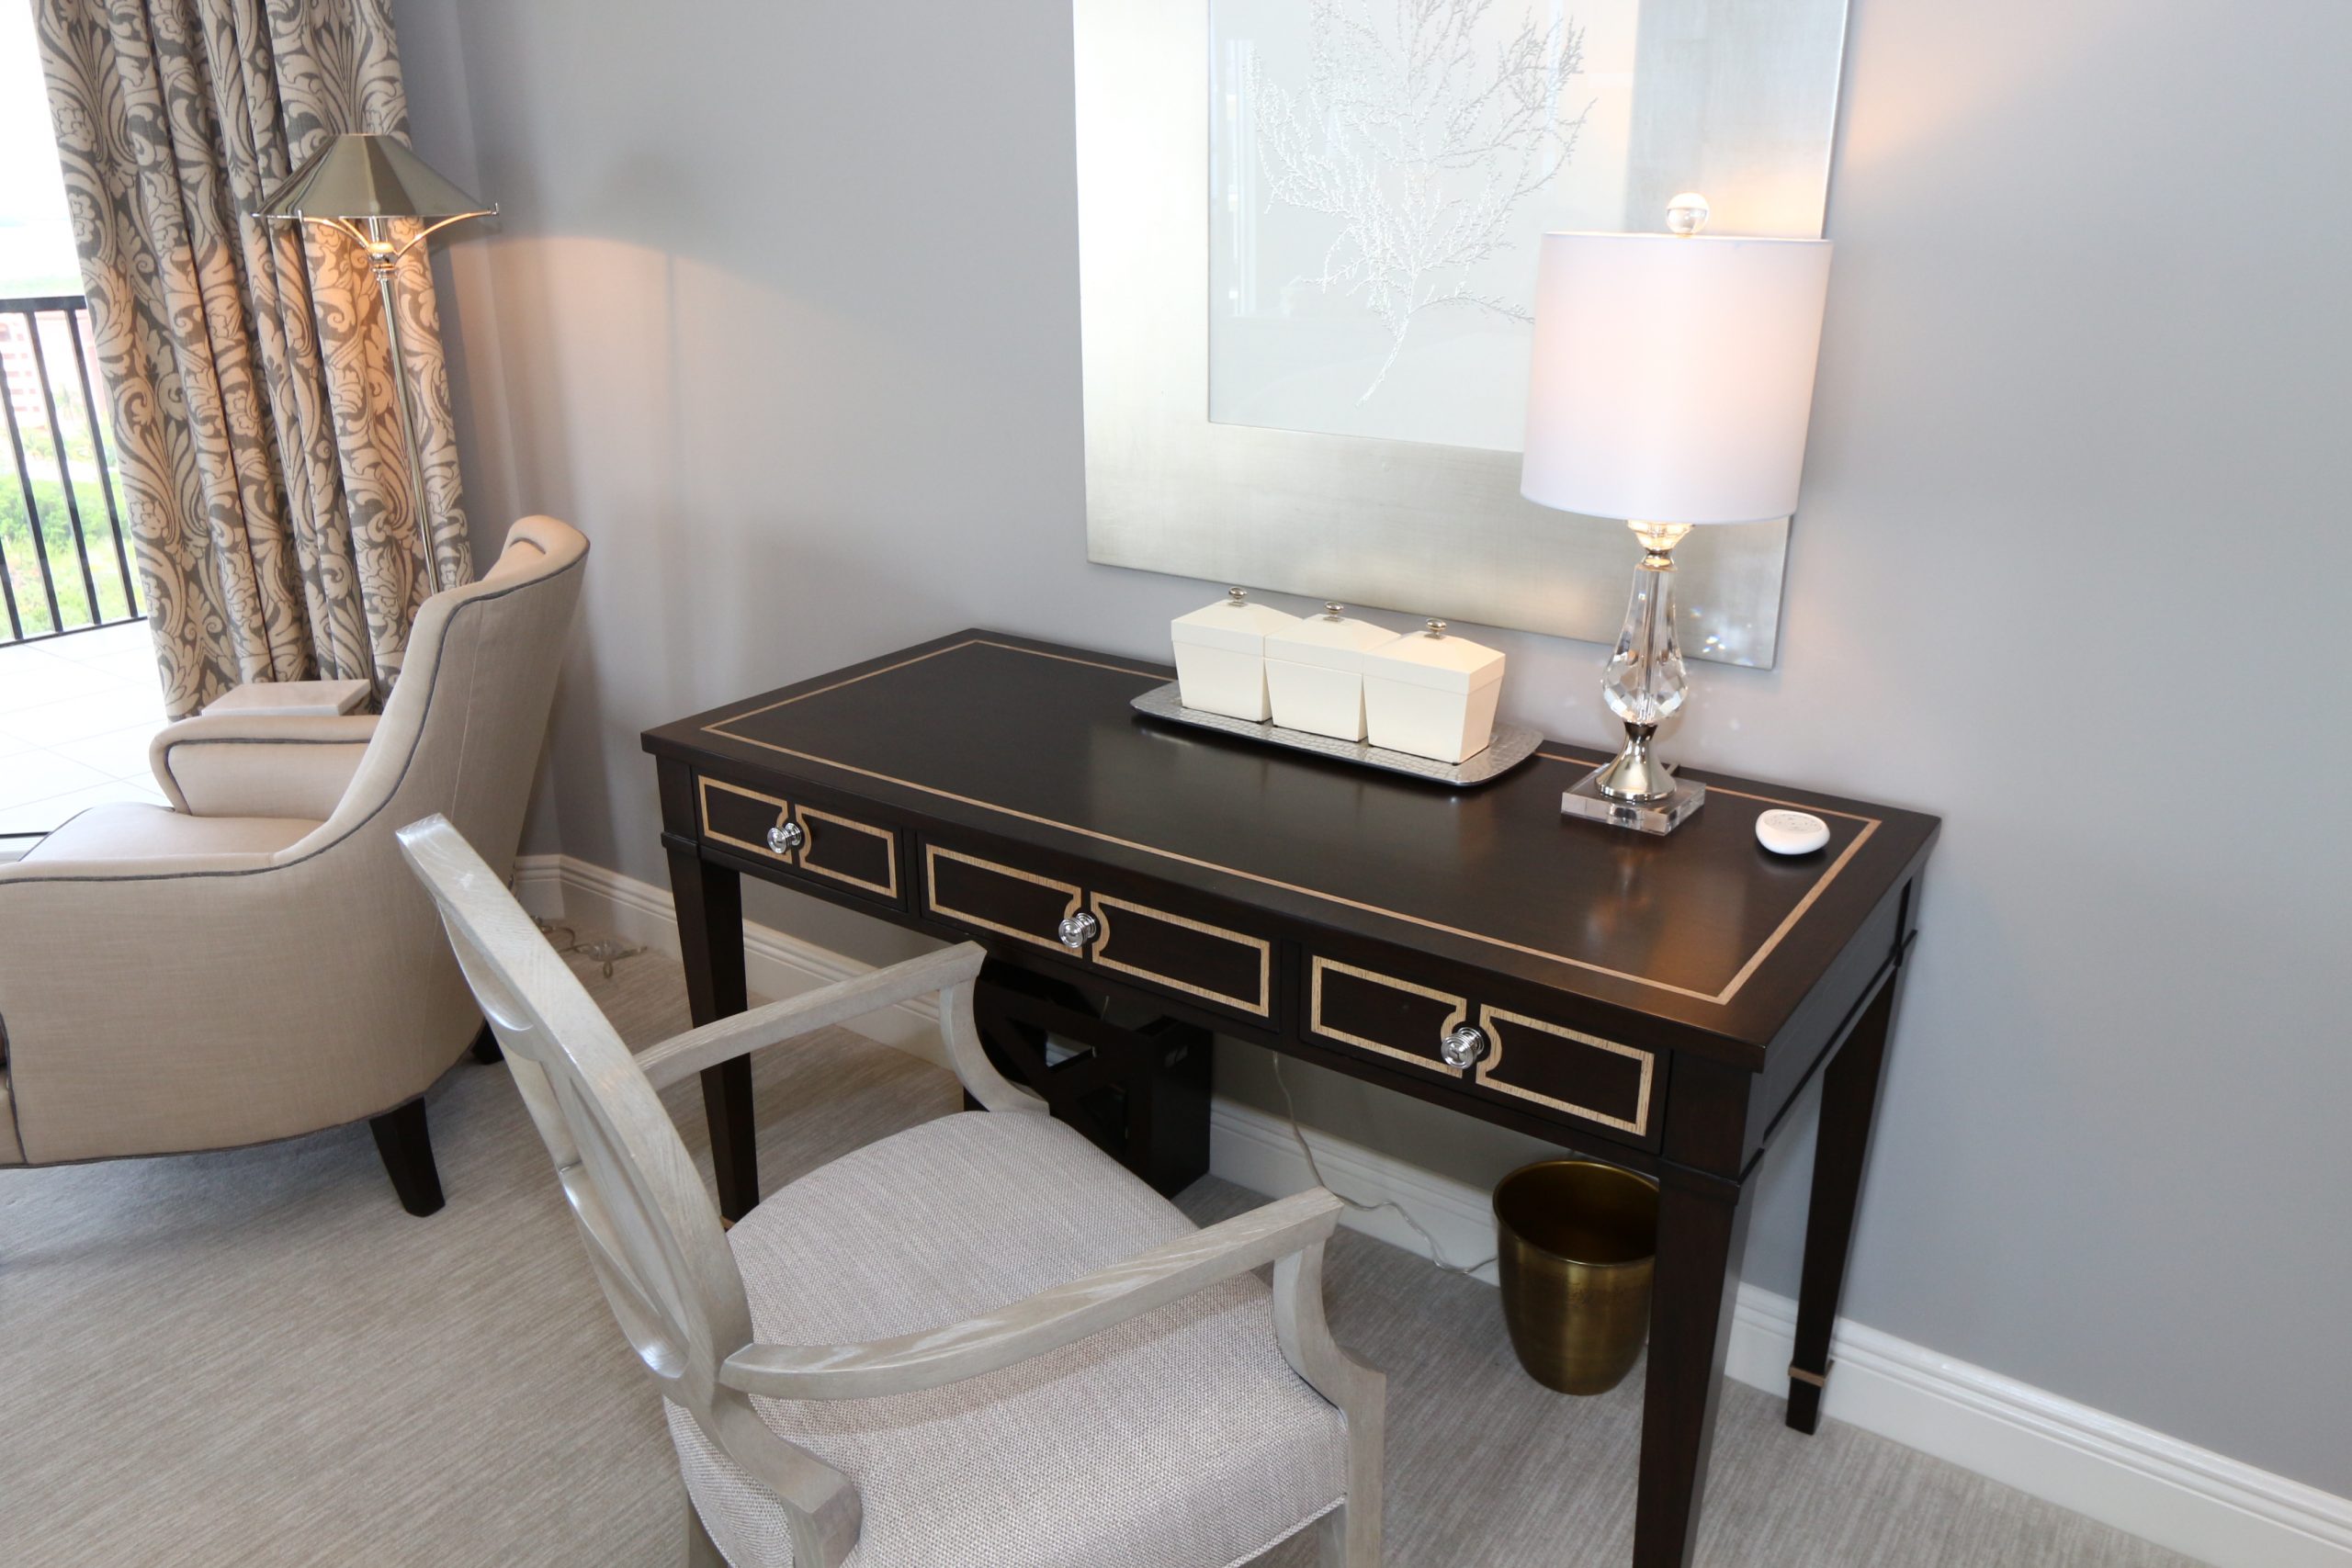 Florida Residence Master Bedroom Desk and Accessories from GailGray Home